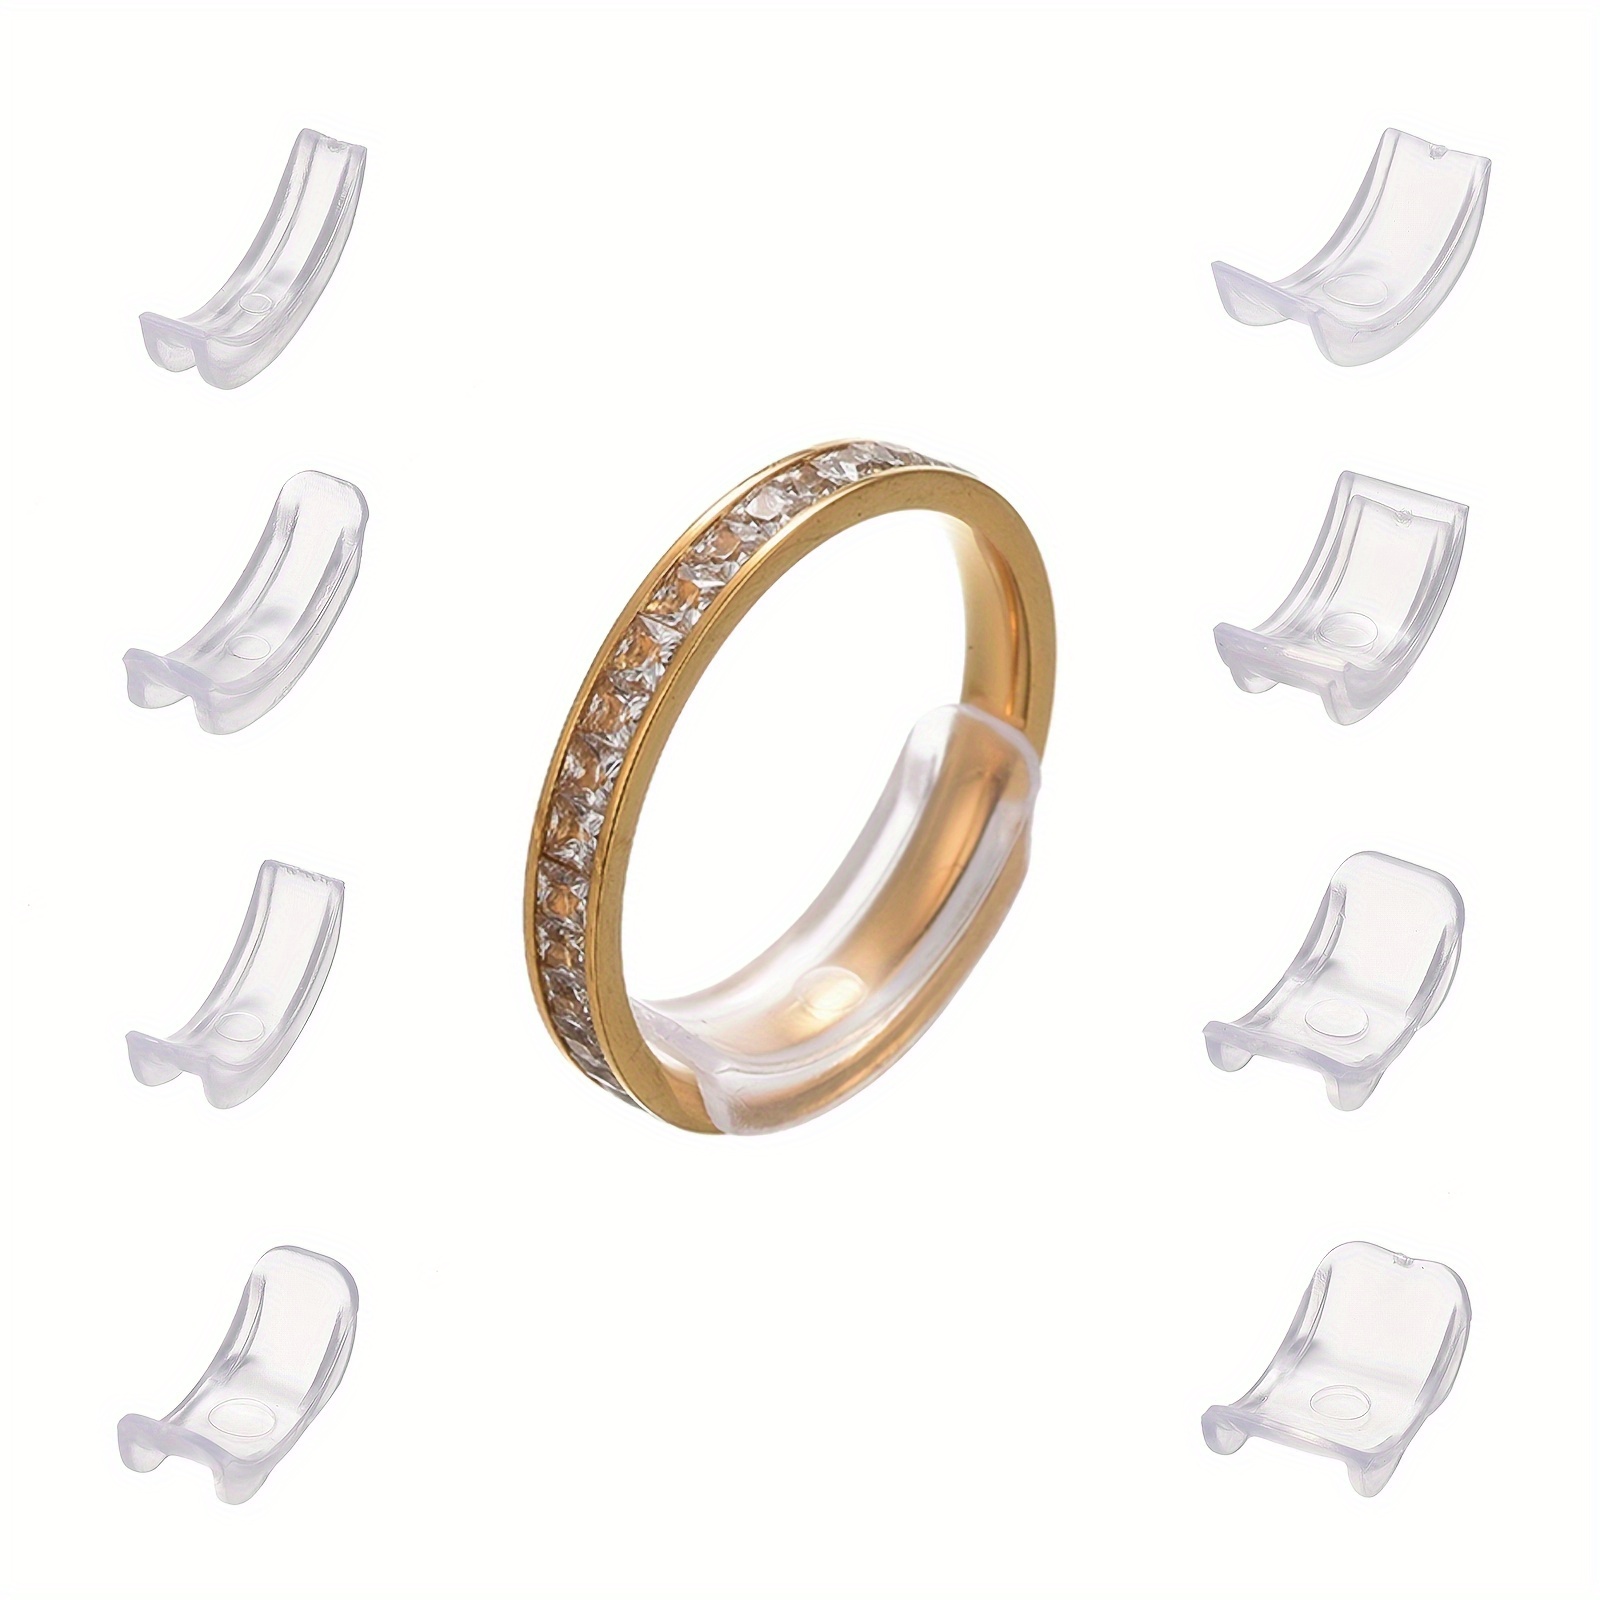 Invisible Ring Size Adjuster Pad  Ring size adjuster, Ring size